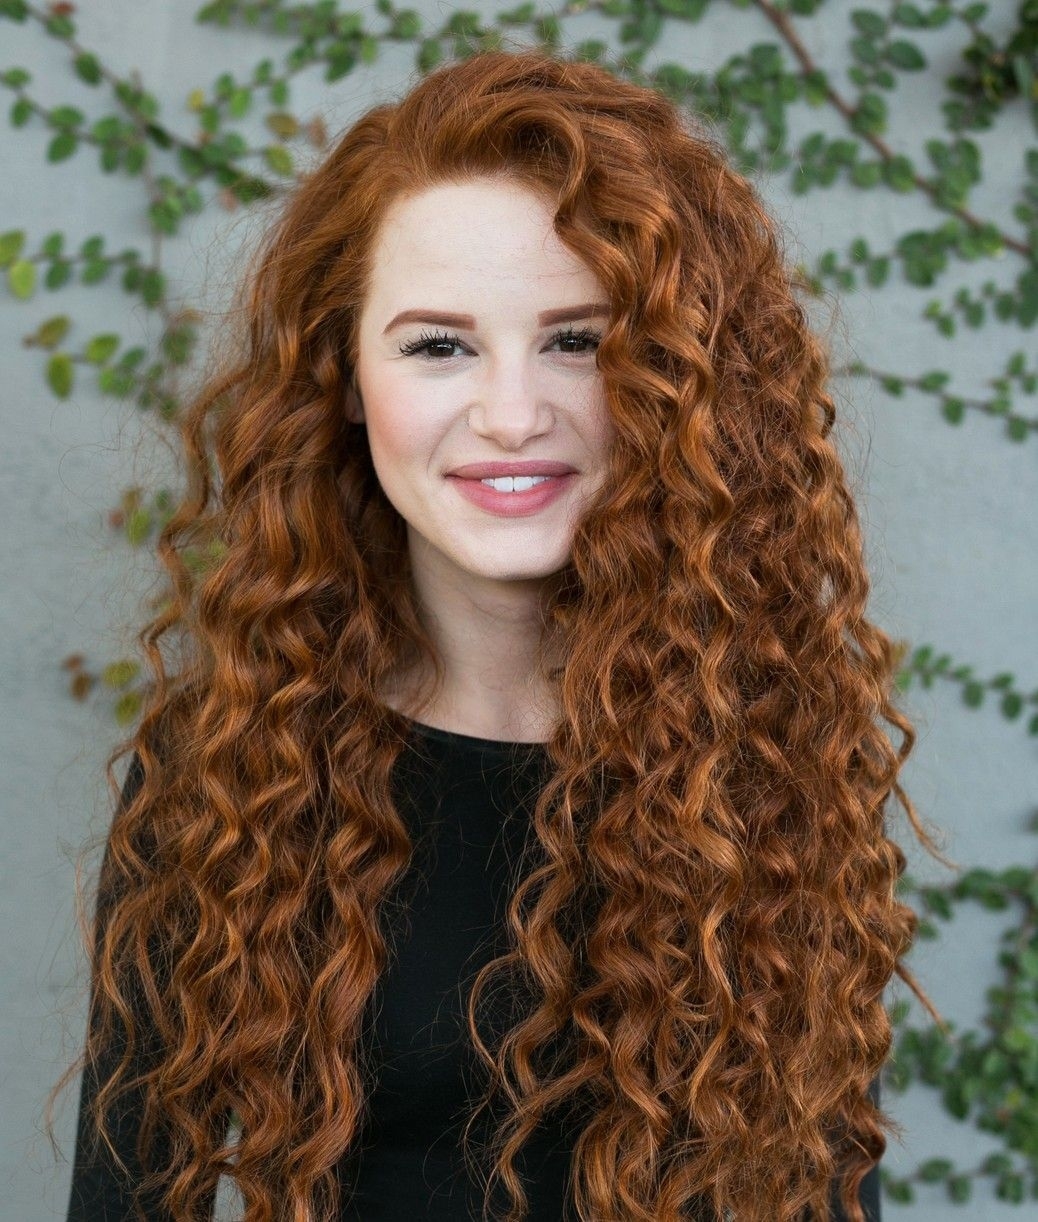 Ling curly red hair style sitting atop a woman's head